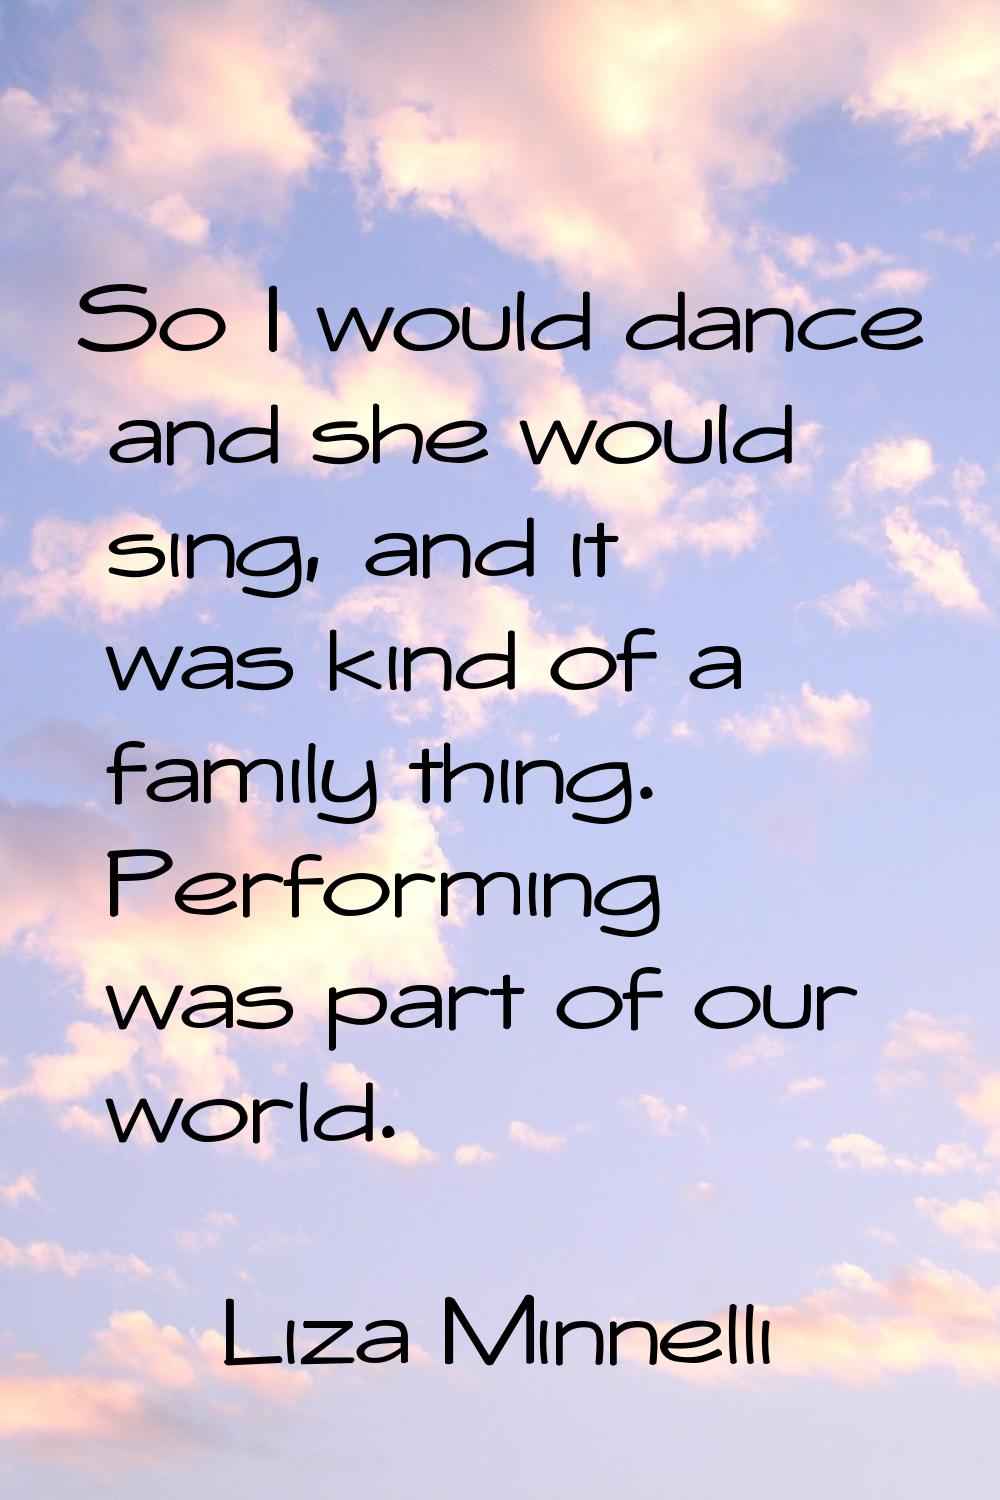 So I would dance and she would sing, and it was kind of a family thing. Performing was part of our 